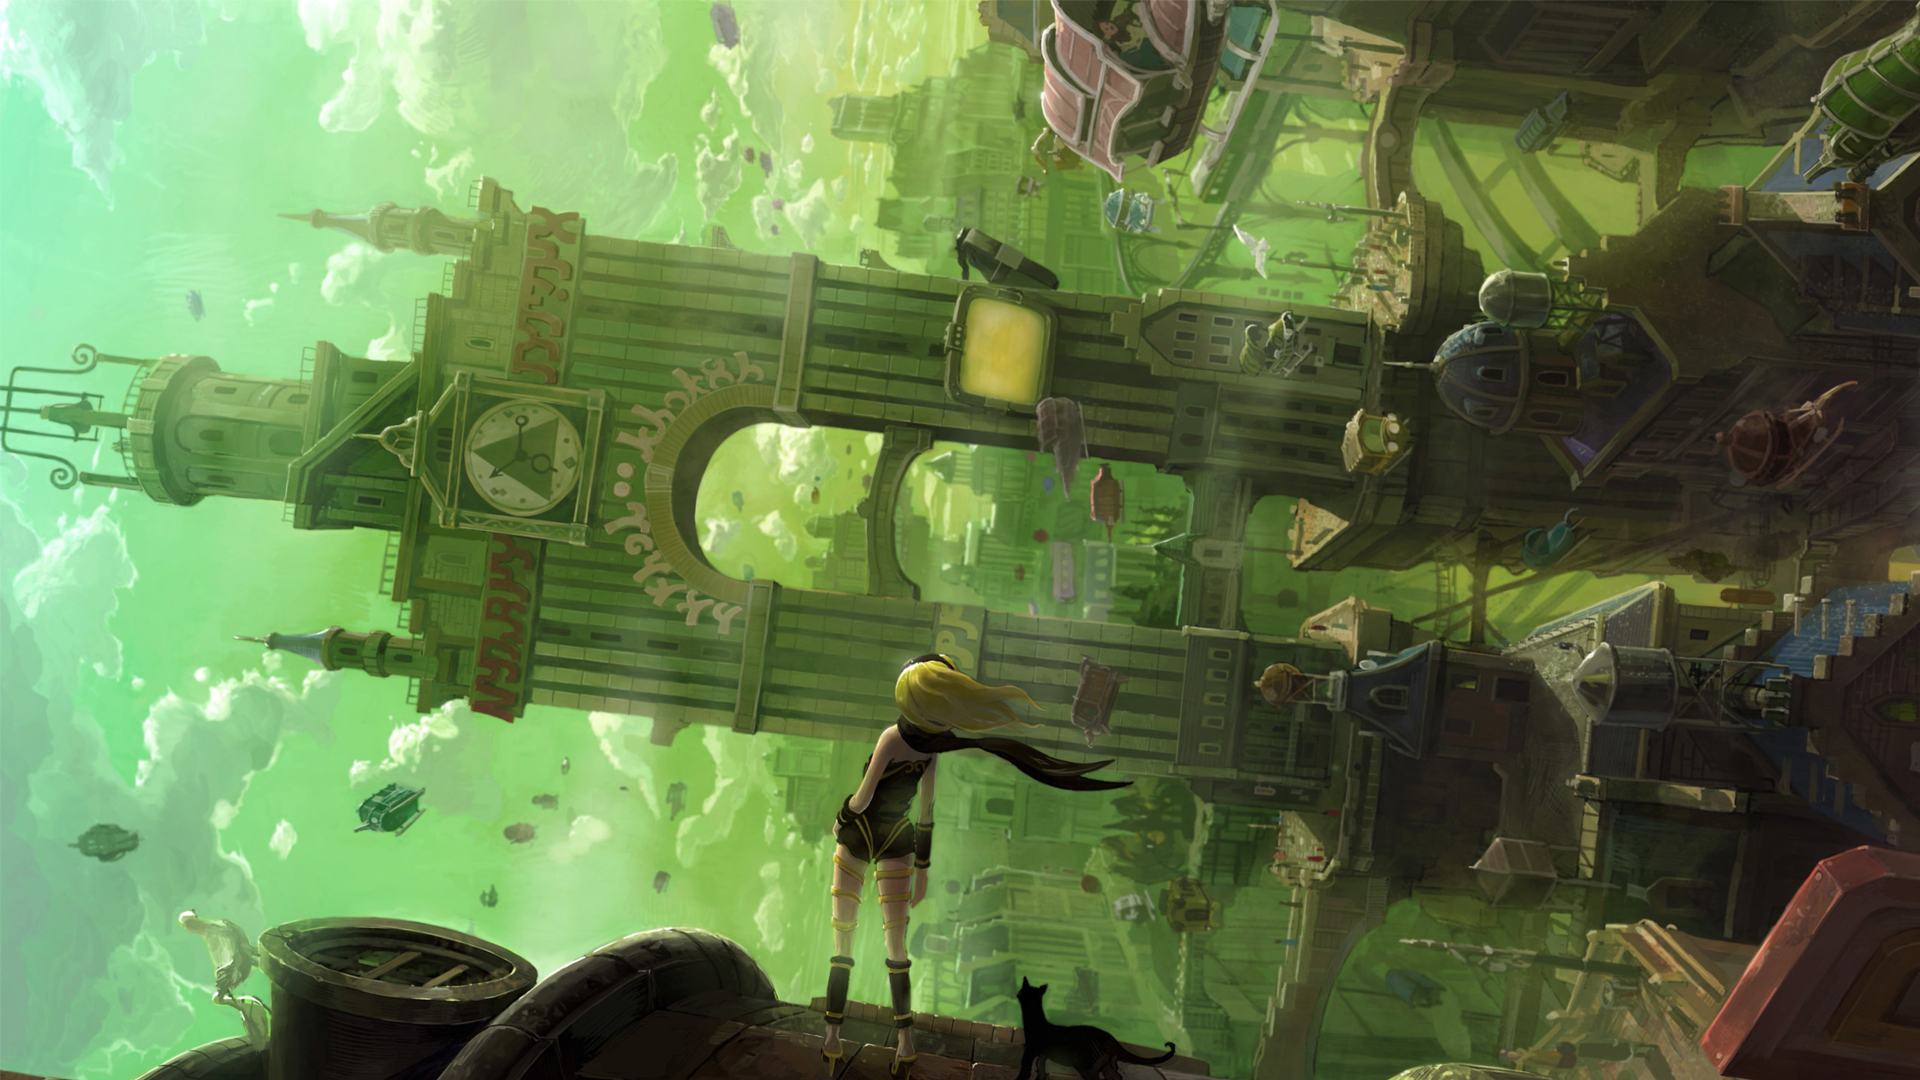 Gravity Rush and Gravity Rush 2 Confirmed For Release on PS4 - The